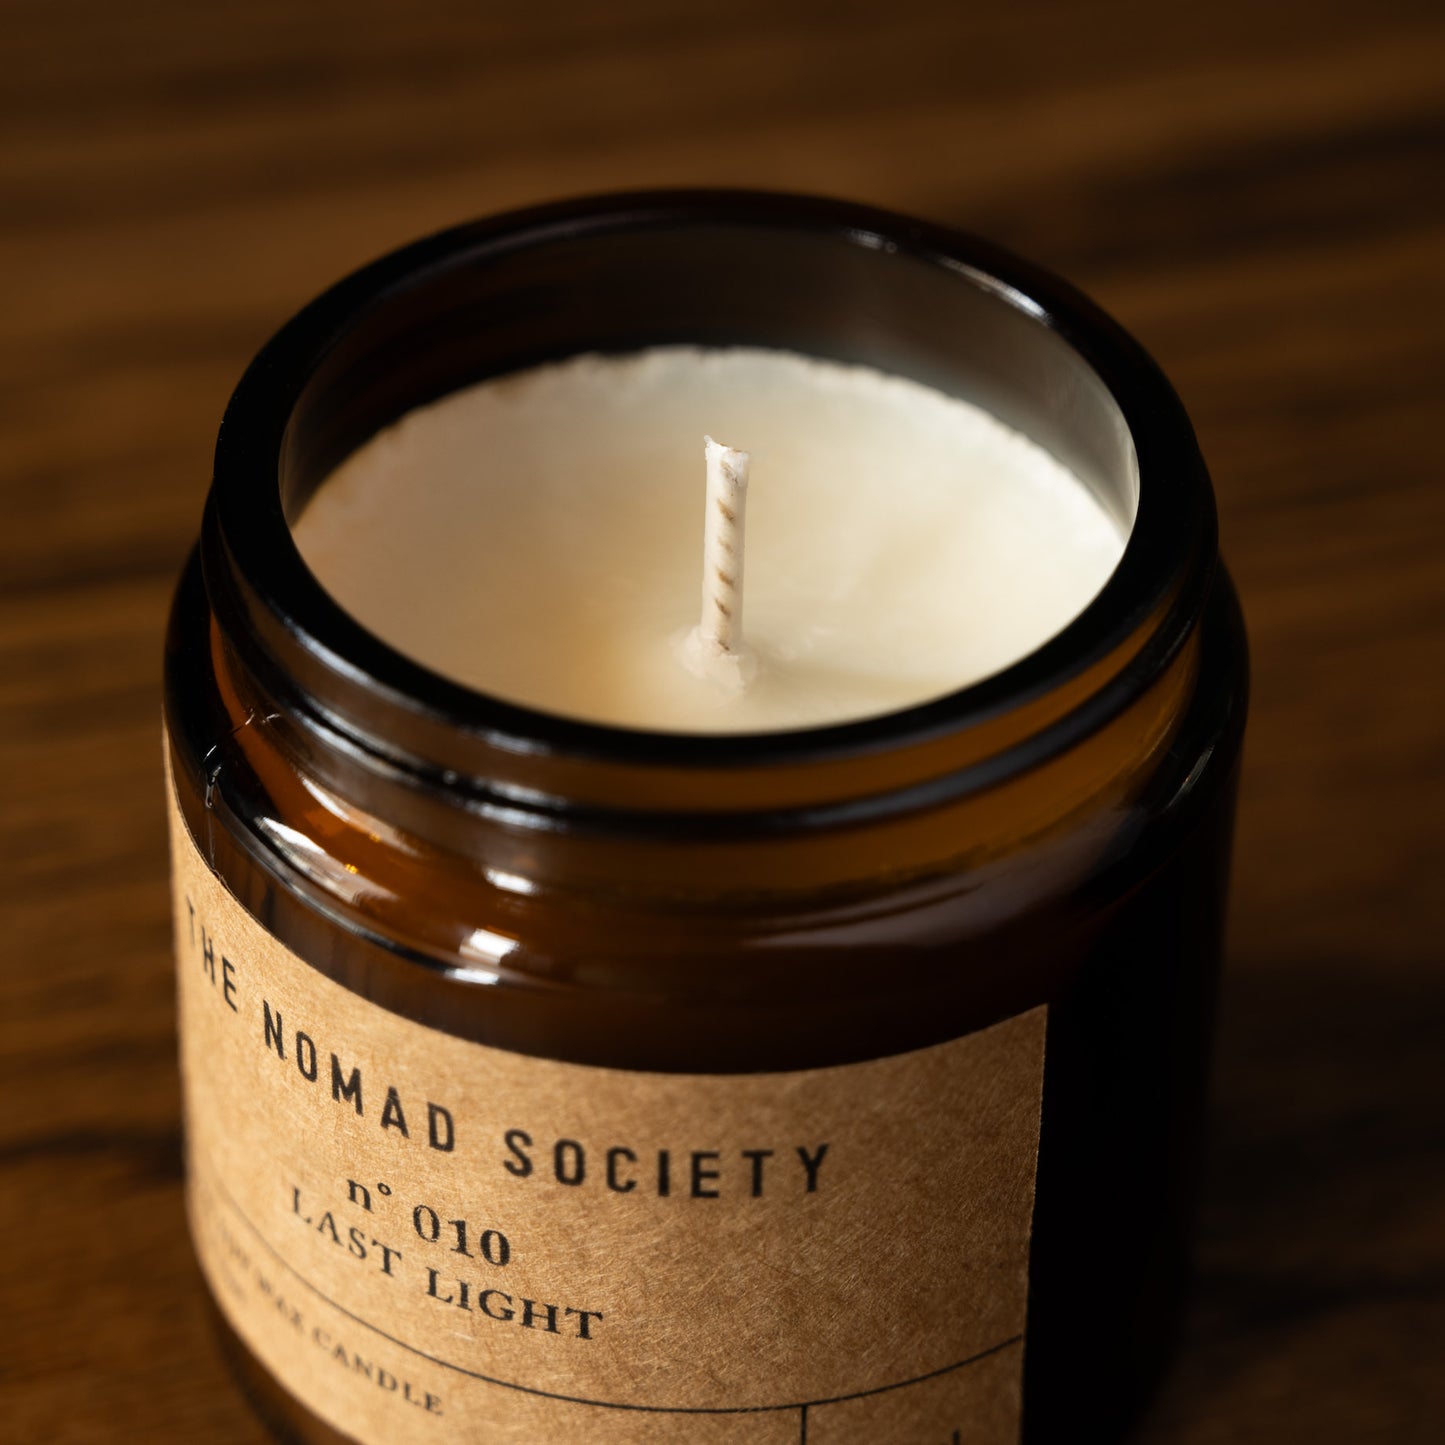 The Nomad Society Small Last Light Candle Wick